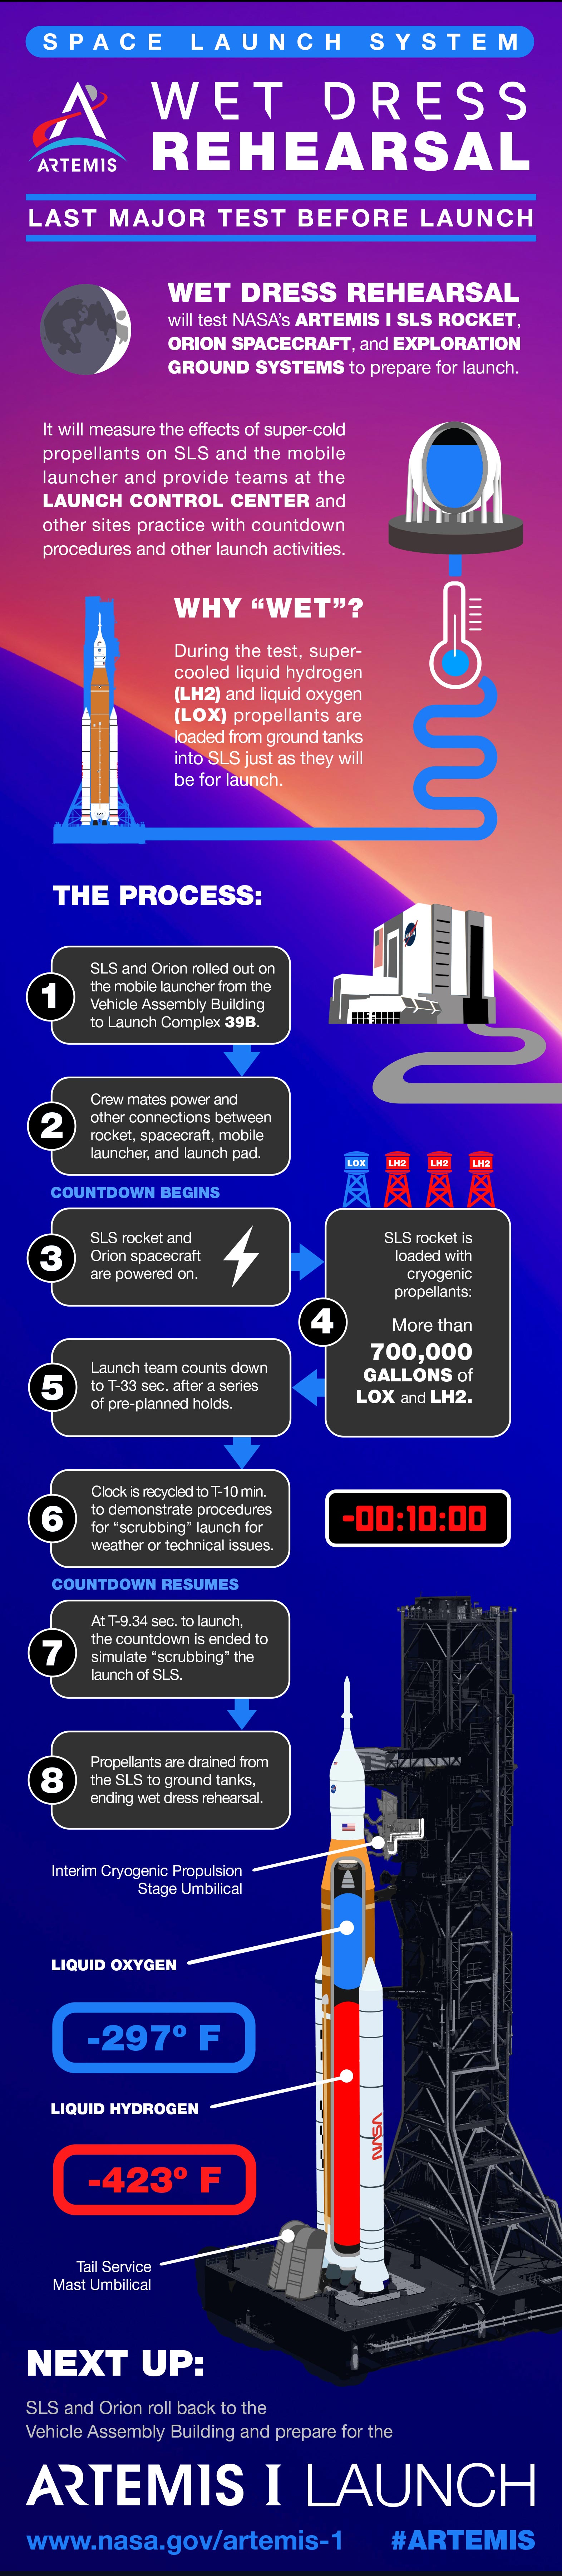 Space Launch System Wet Dress Rehearsal Infographic